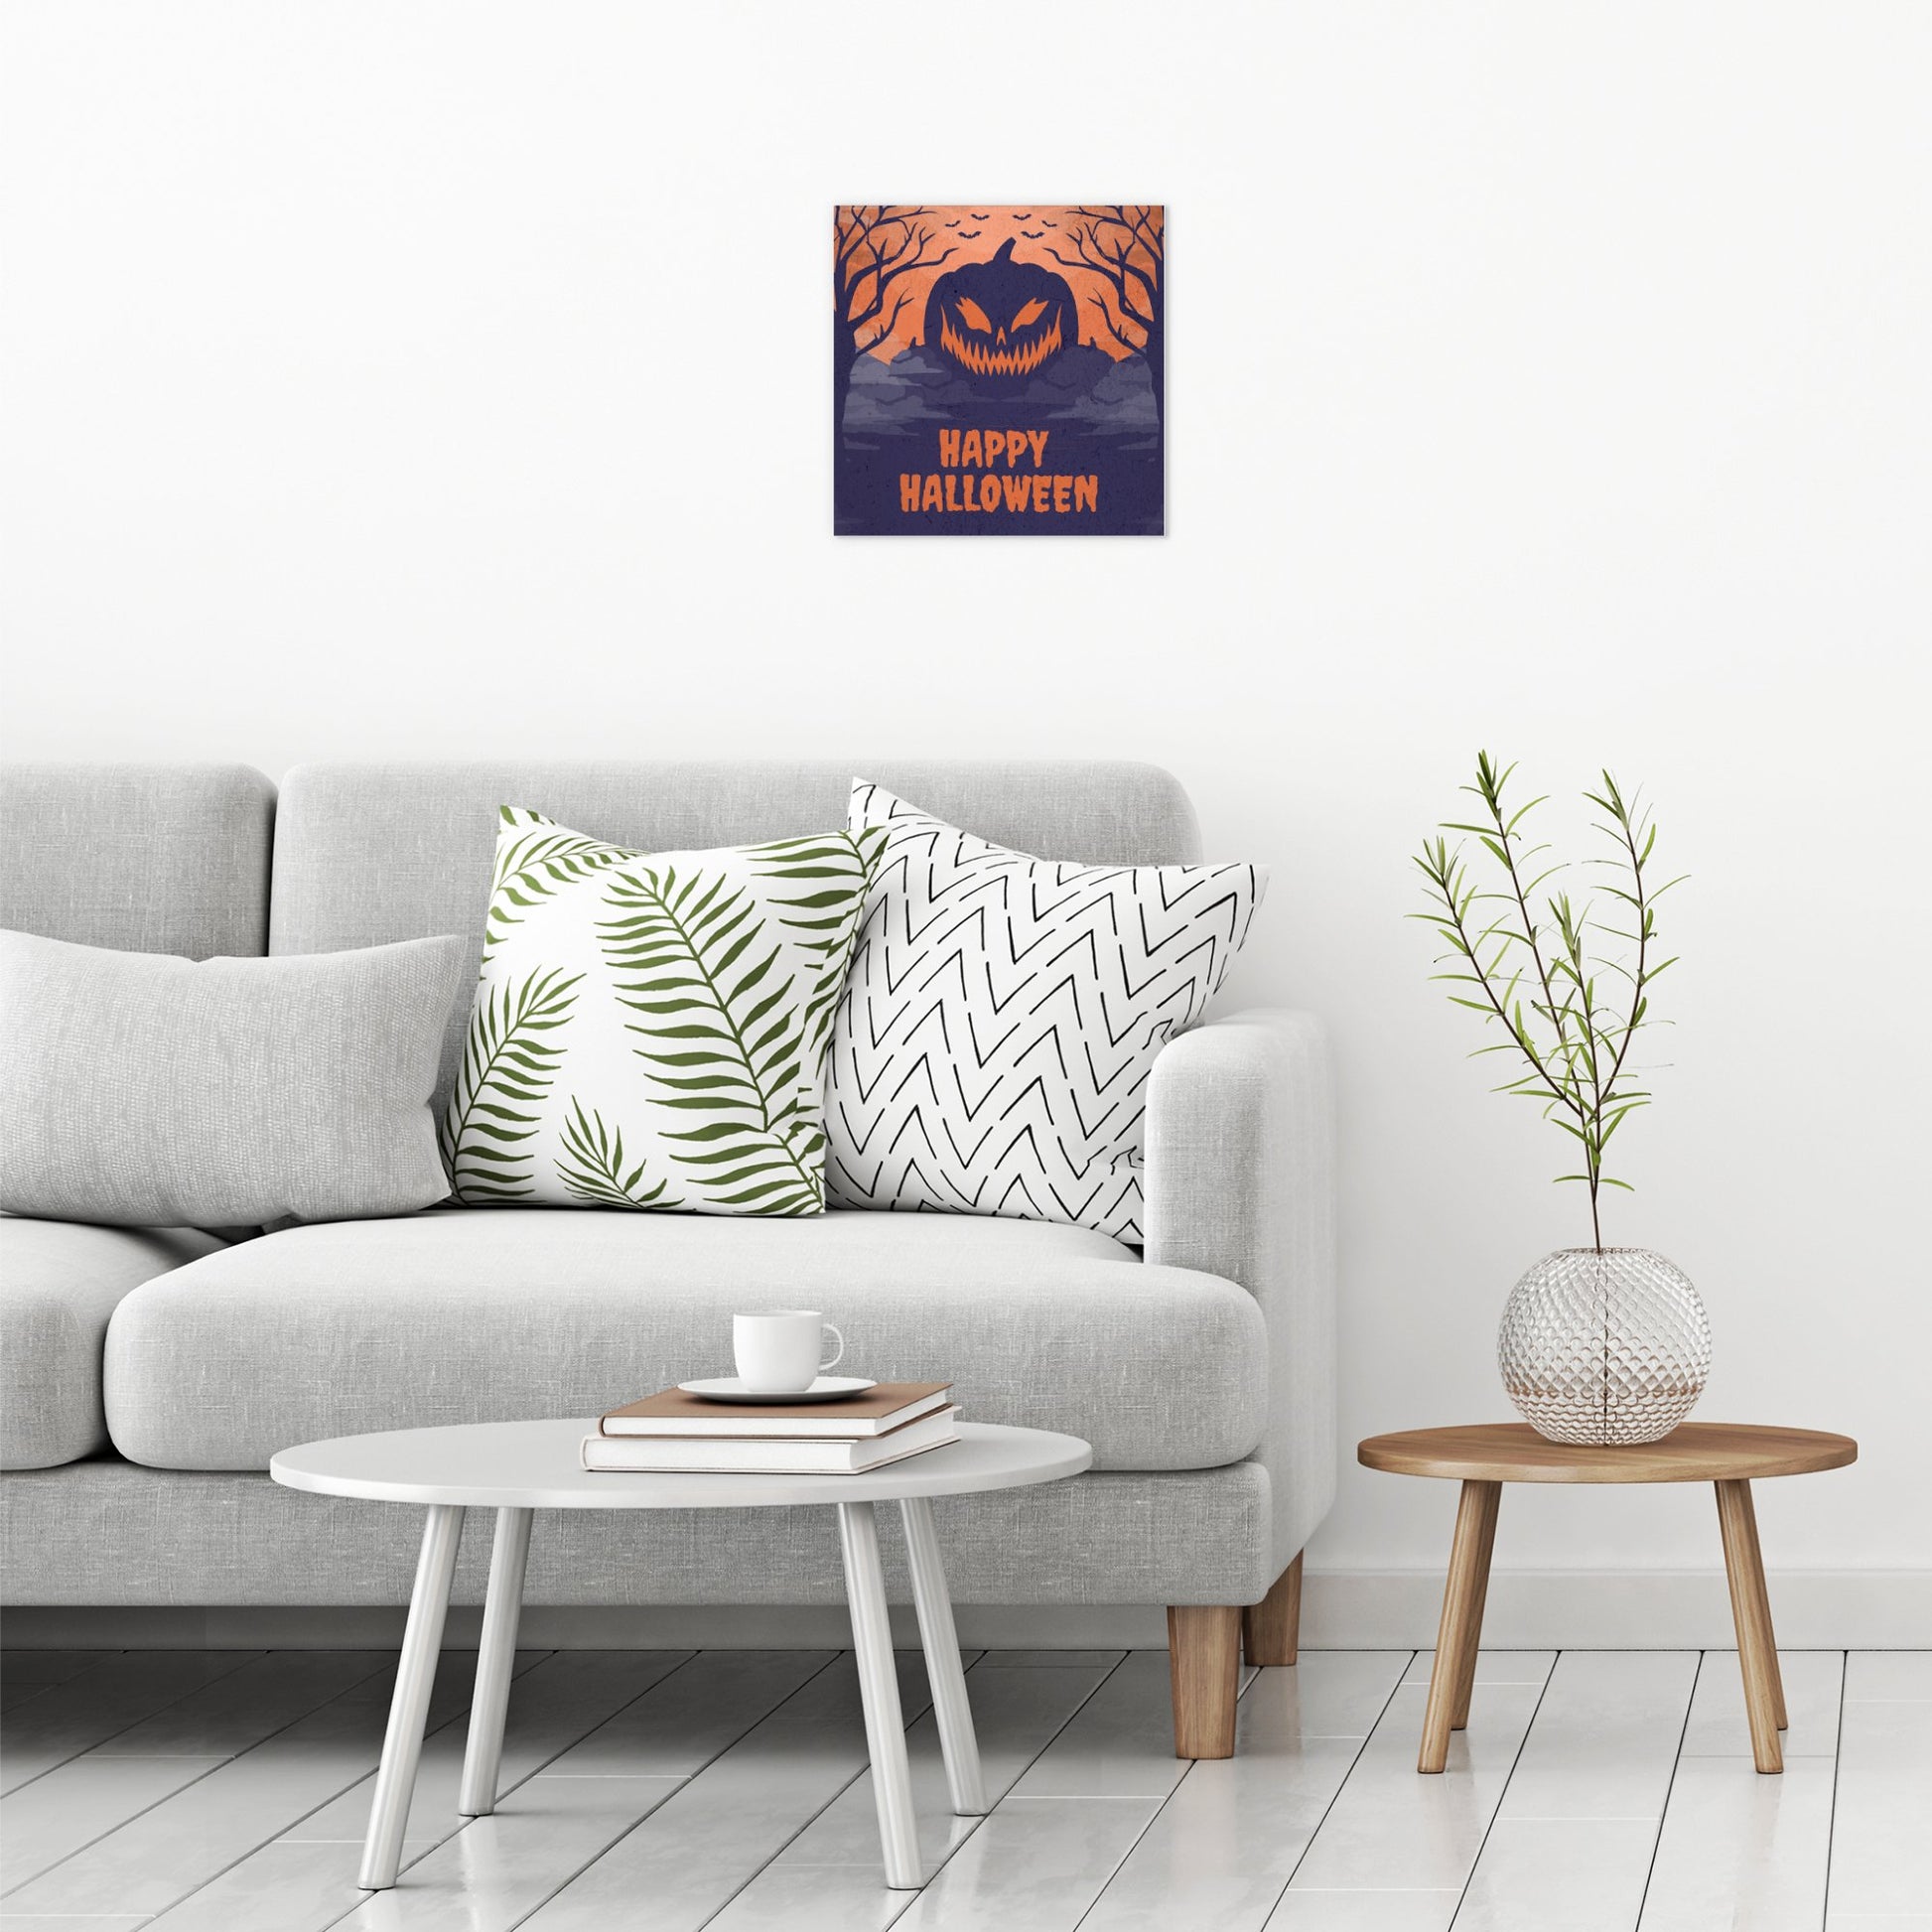 A contemporary modern room view showing a medium size metal art poster display plate with printed design of a Happy Halloween Scary Pumpkin